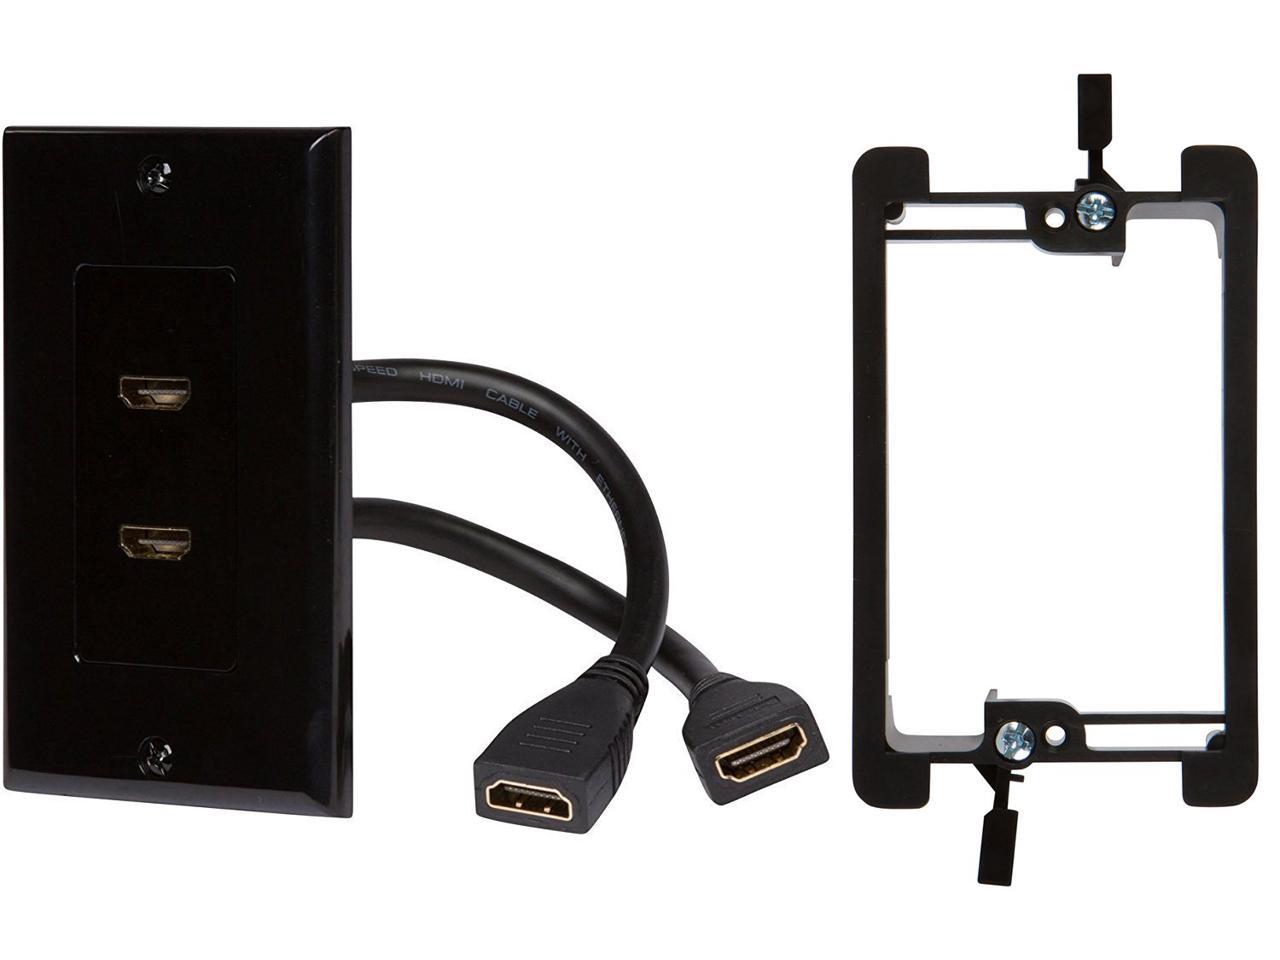 Buyer's Point HDMI Wall Plate[UL Listed] 2 Port Insert with 6-Inch Built-in Flexible Hi-Speed HDMI Cable with Ethernet Decora Style 2-Piece Pigtail Jack/Plug for Dual Outlet Port Pack of 1 Black Kit - image 1 of 6